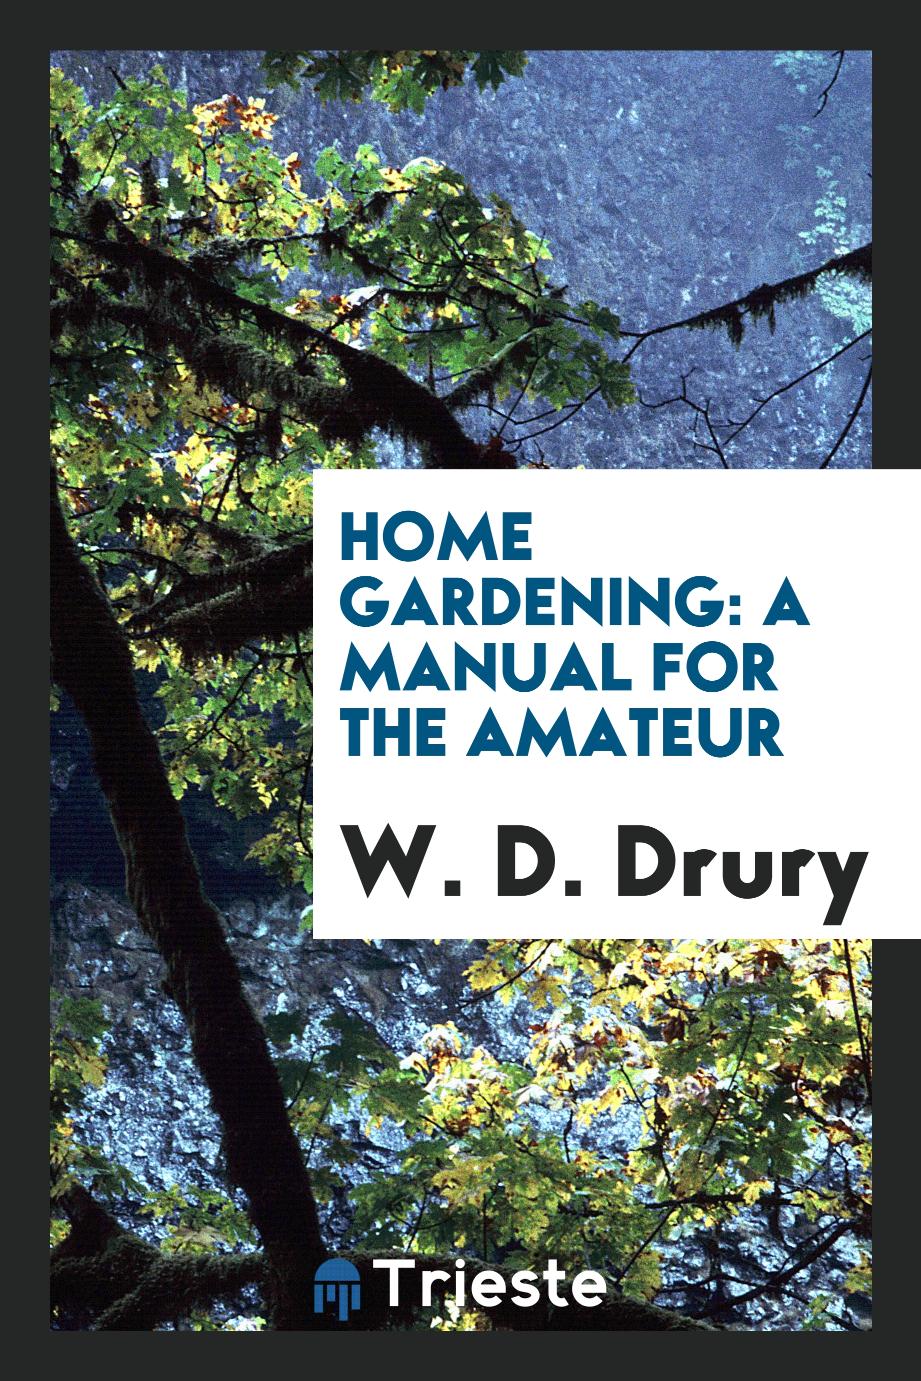 Home Gardening: A Manual for the Amateur